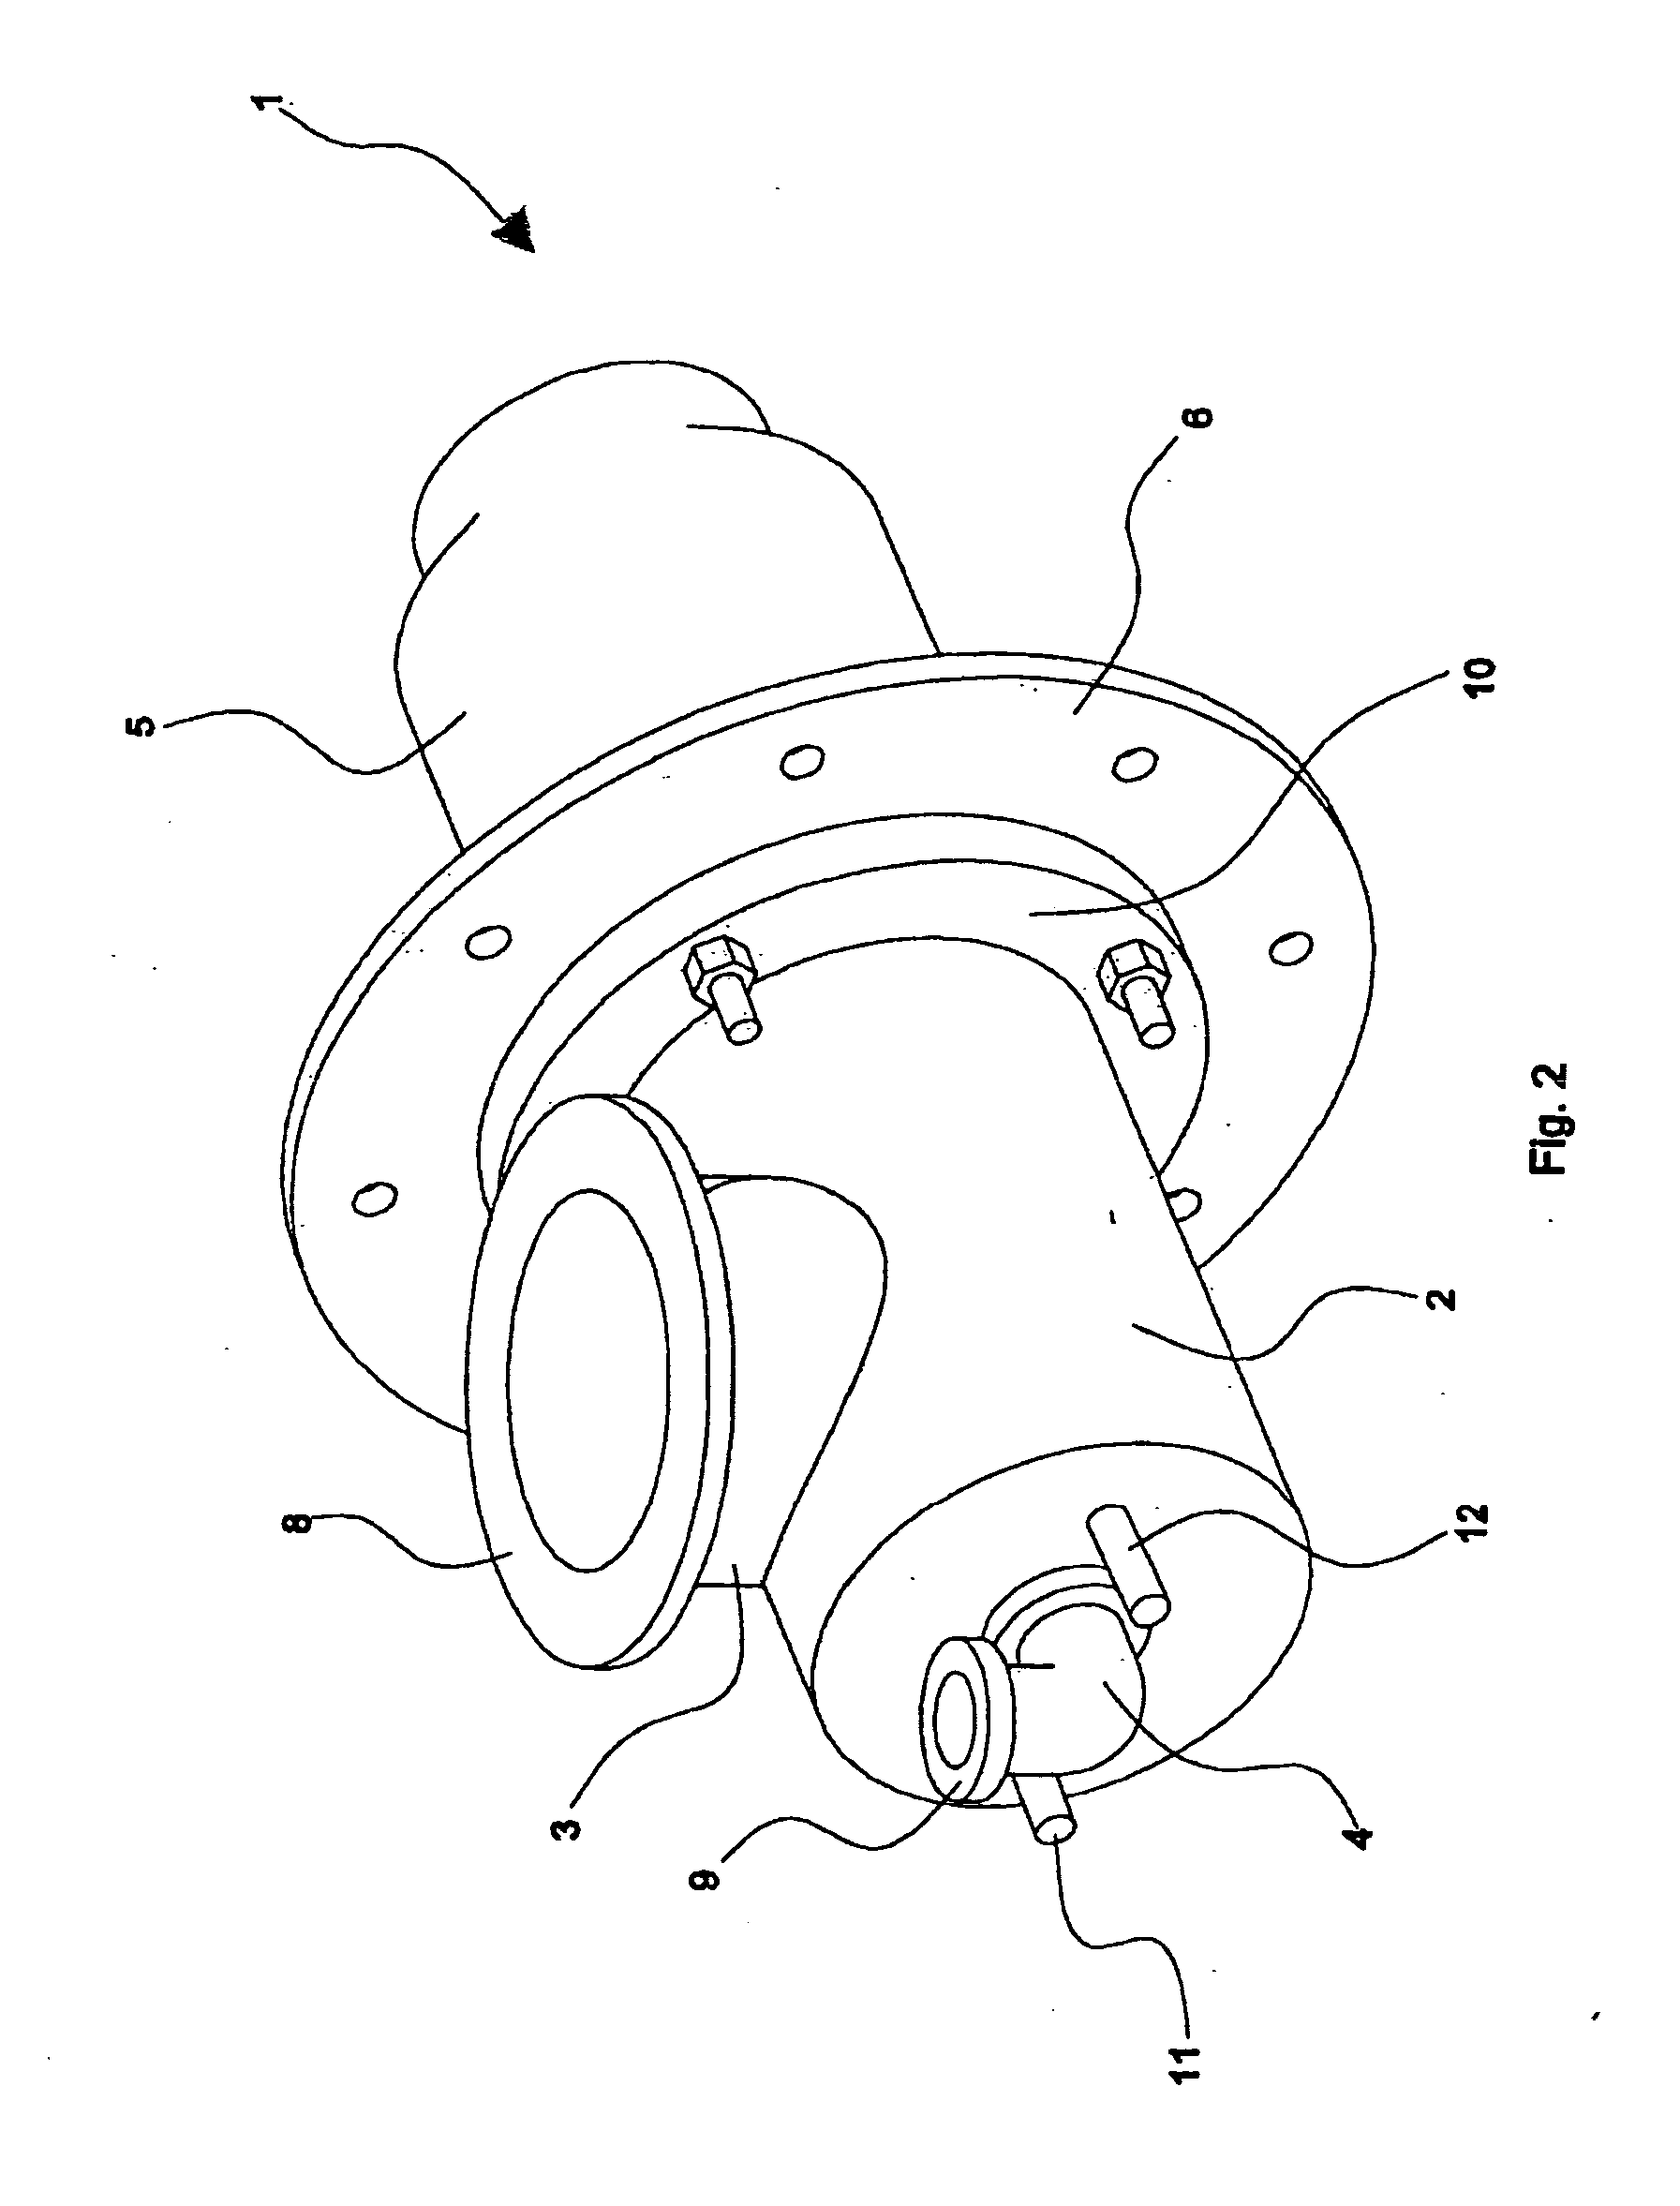 Gas measurement module for use in therapeutic settings comprising reflective scanning microspectrometer